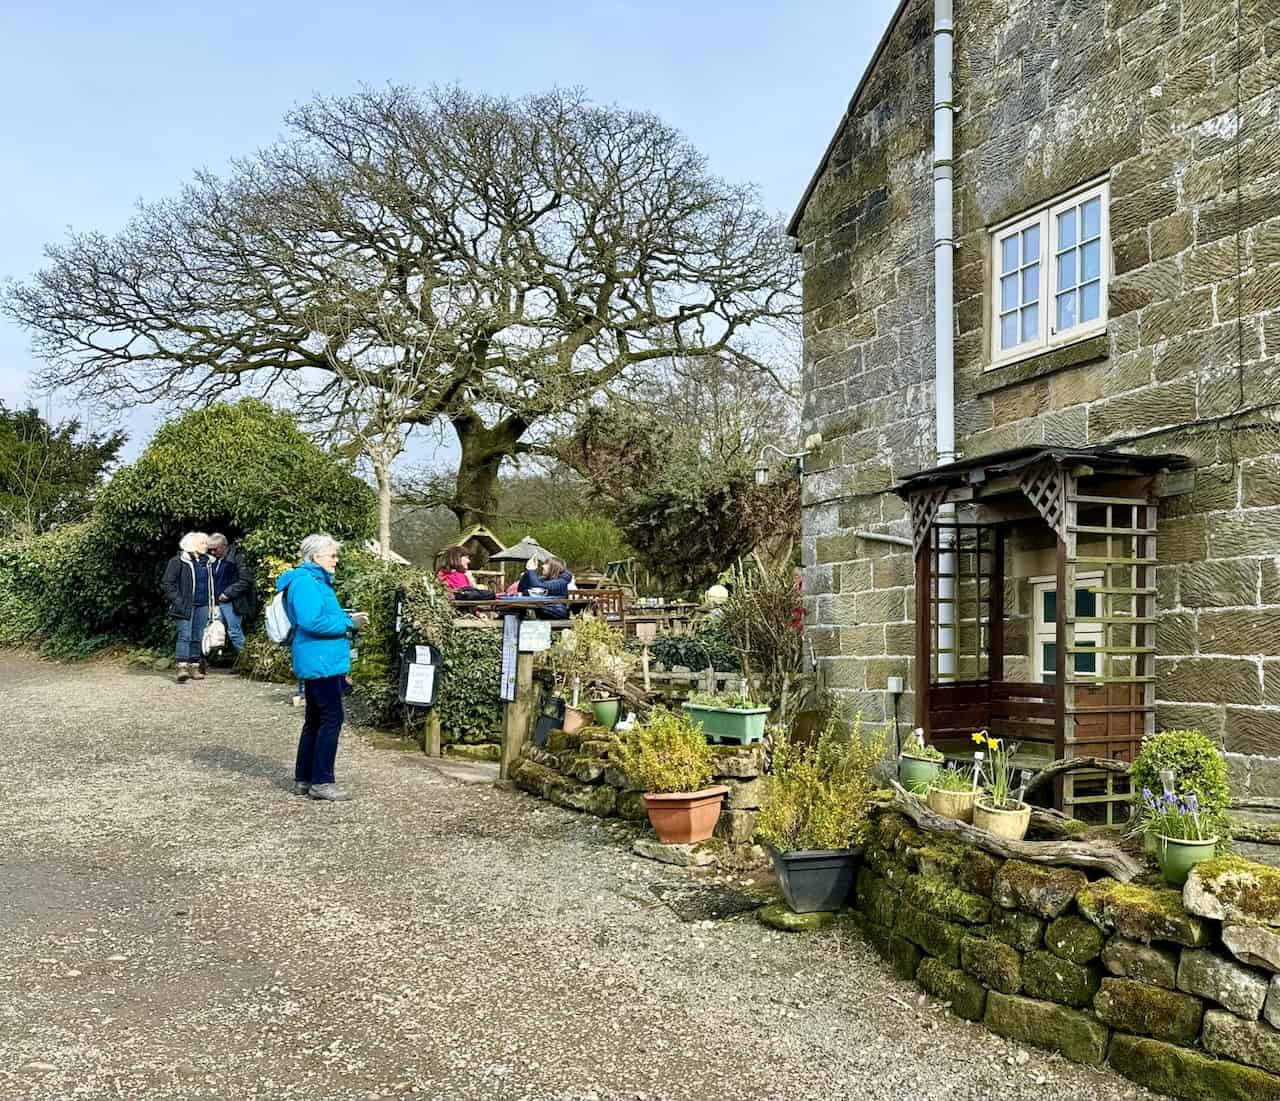 The Daffy Caffy at High Mill offers a delightful stop for refreshments during the Farndale daffodils walk.